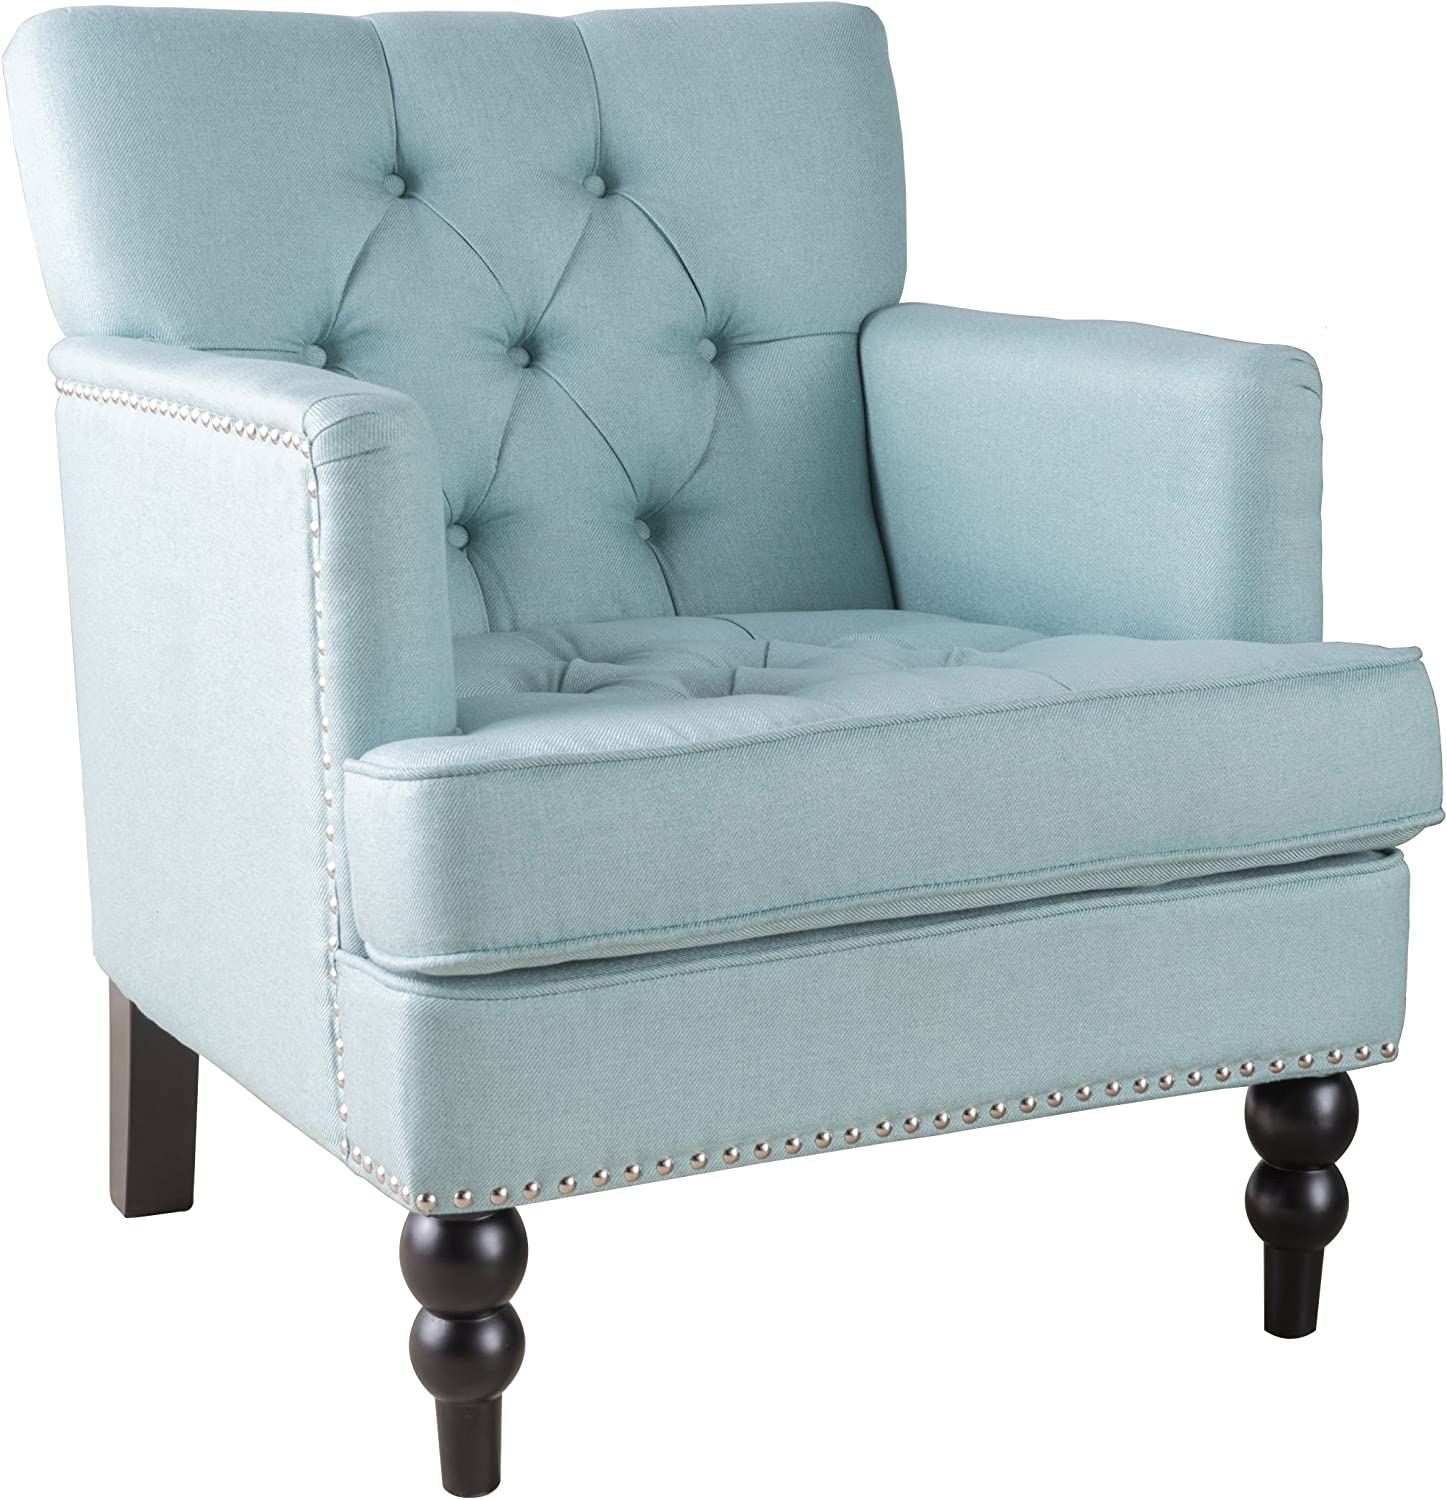 Christopher Knight Home Club Chair in Malone Fabric - Light Blue